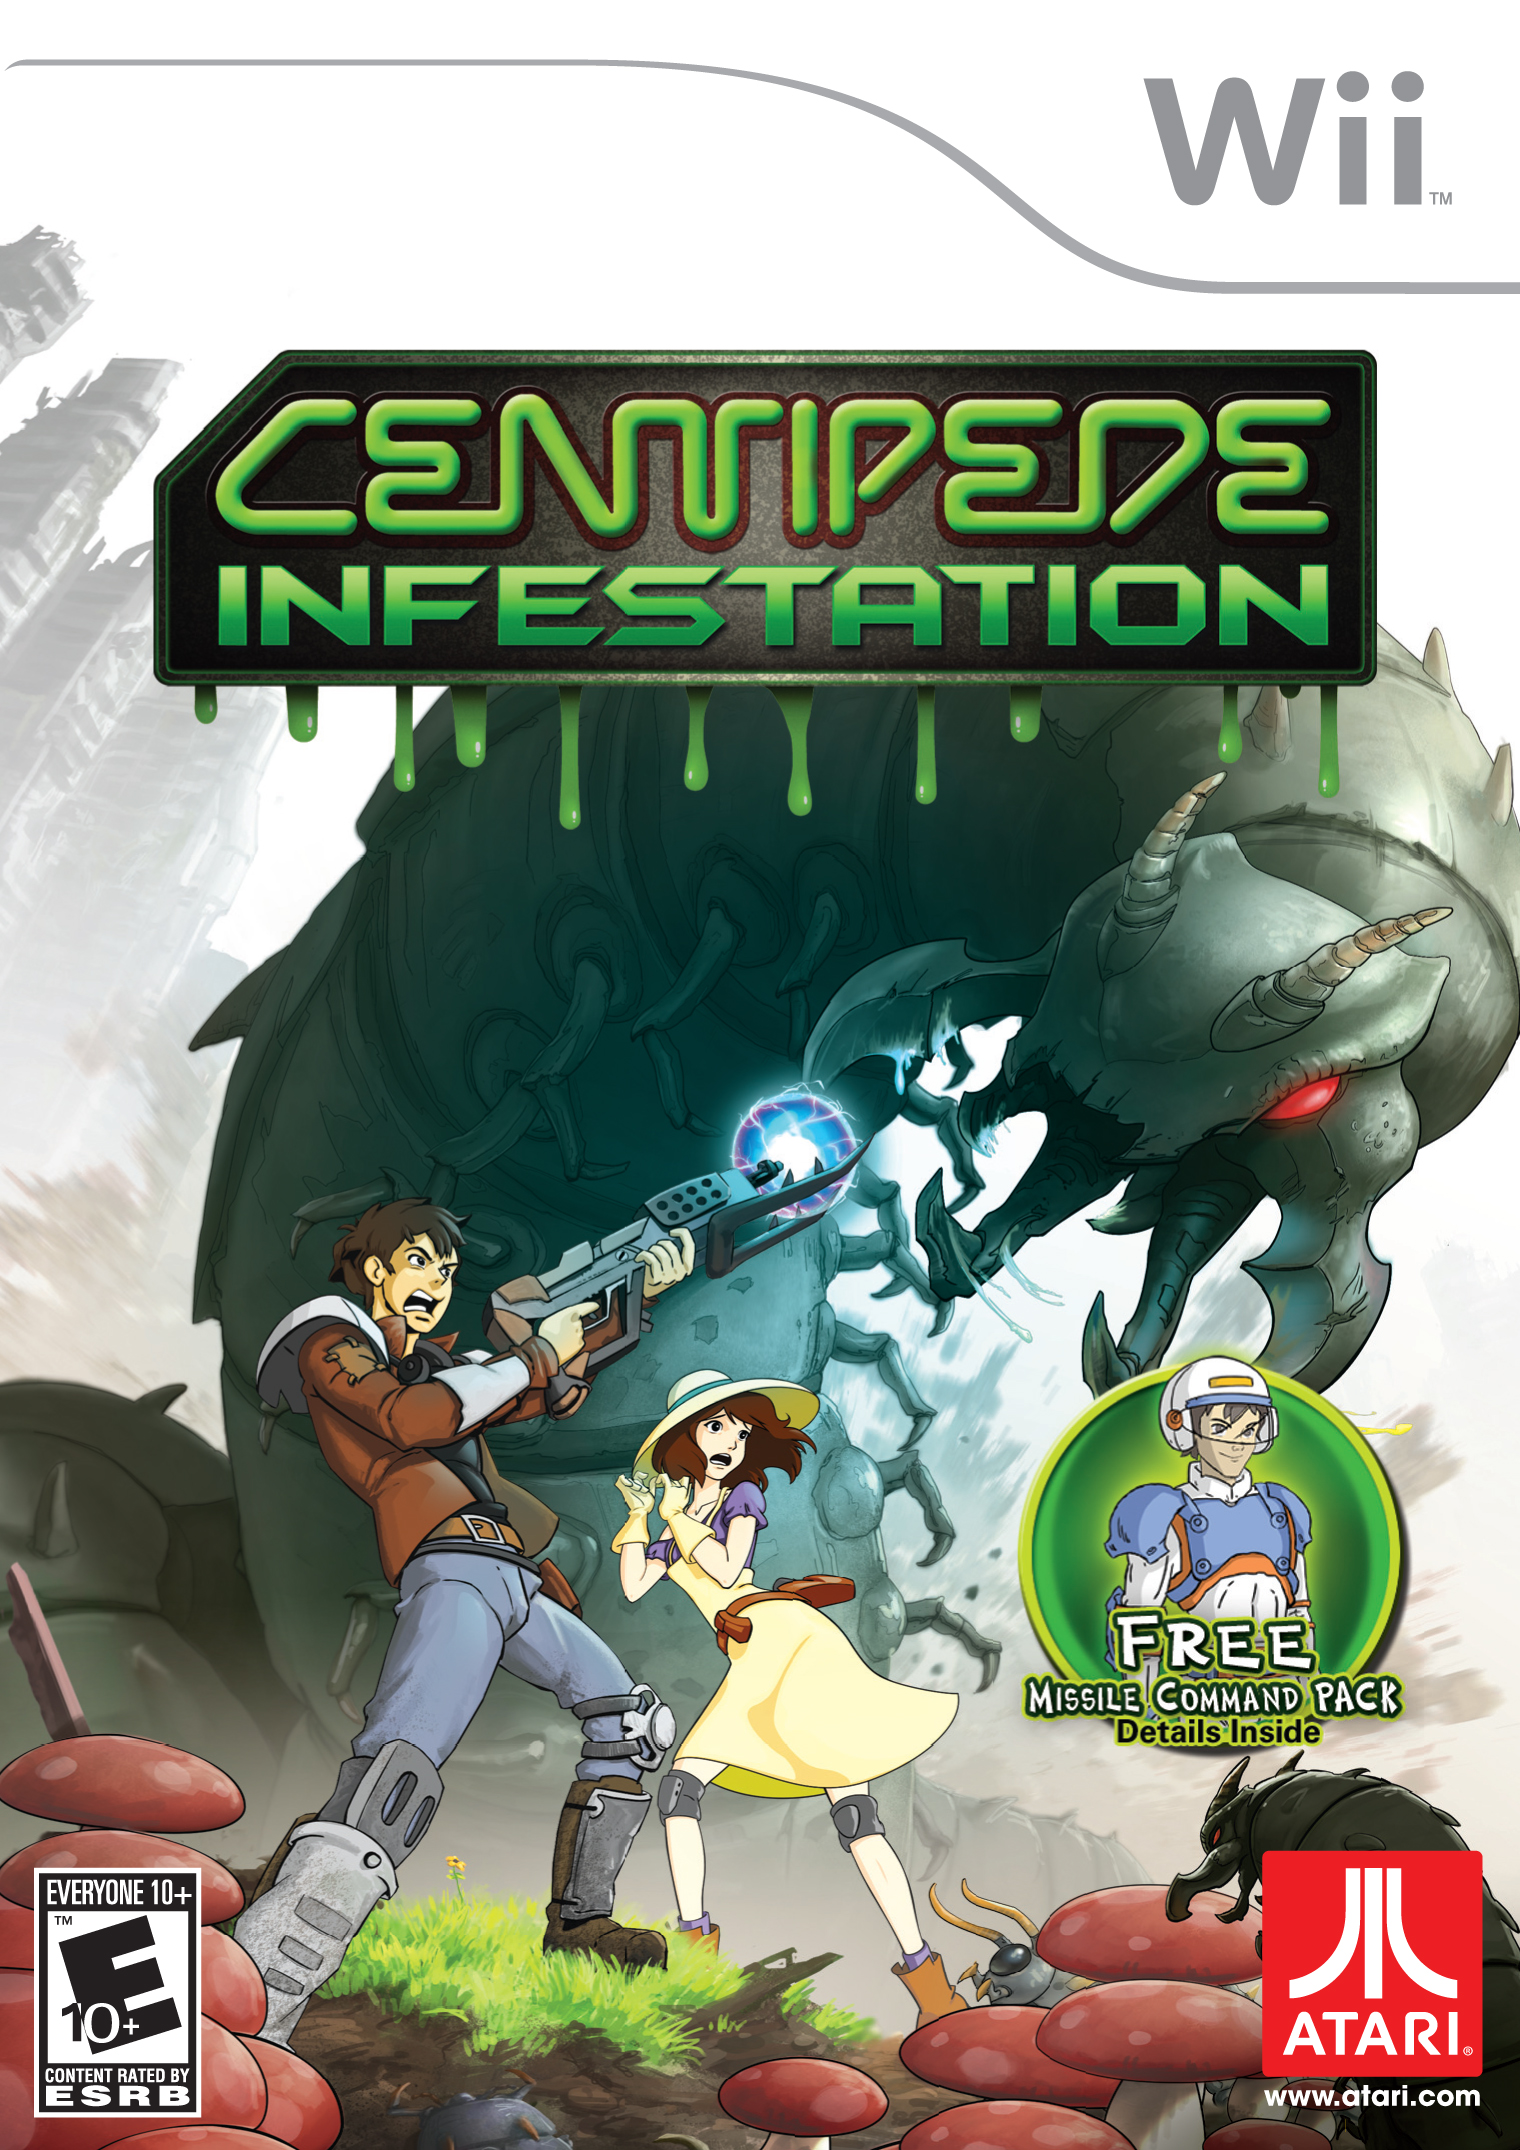 Centipede: Infestation unleashes new screens and boxart